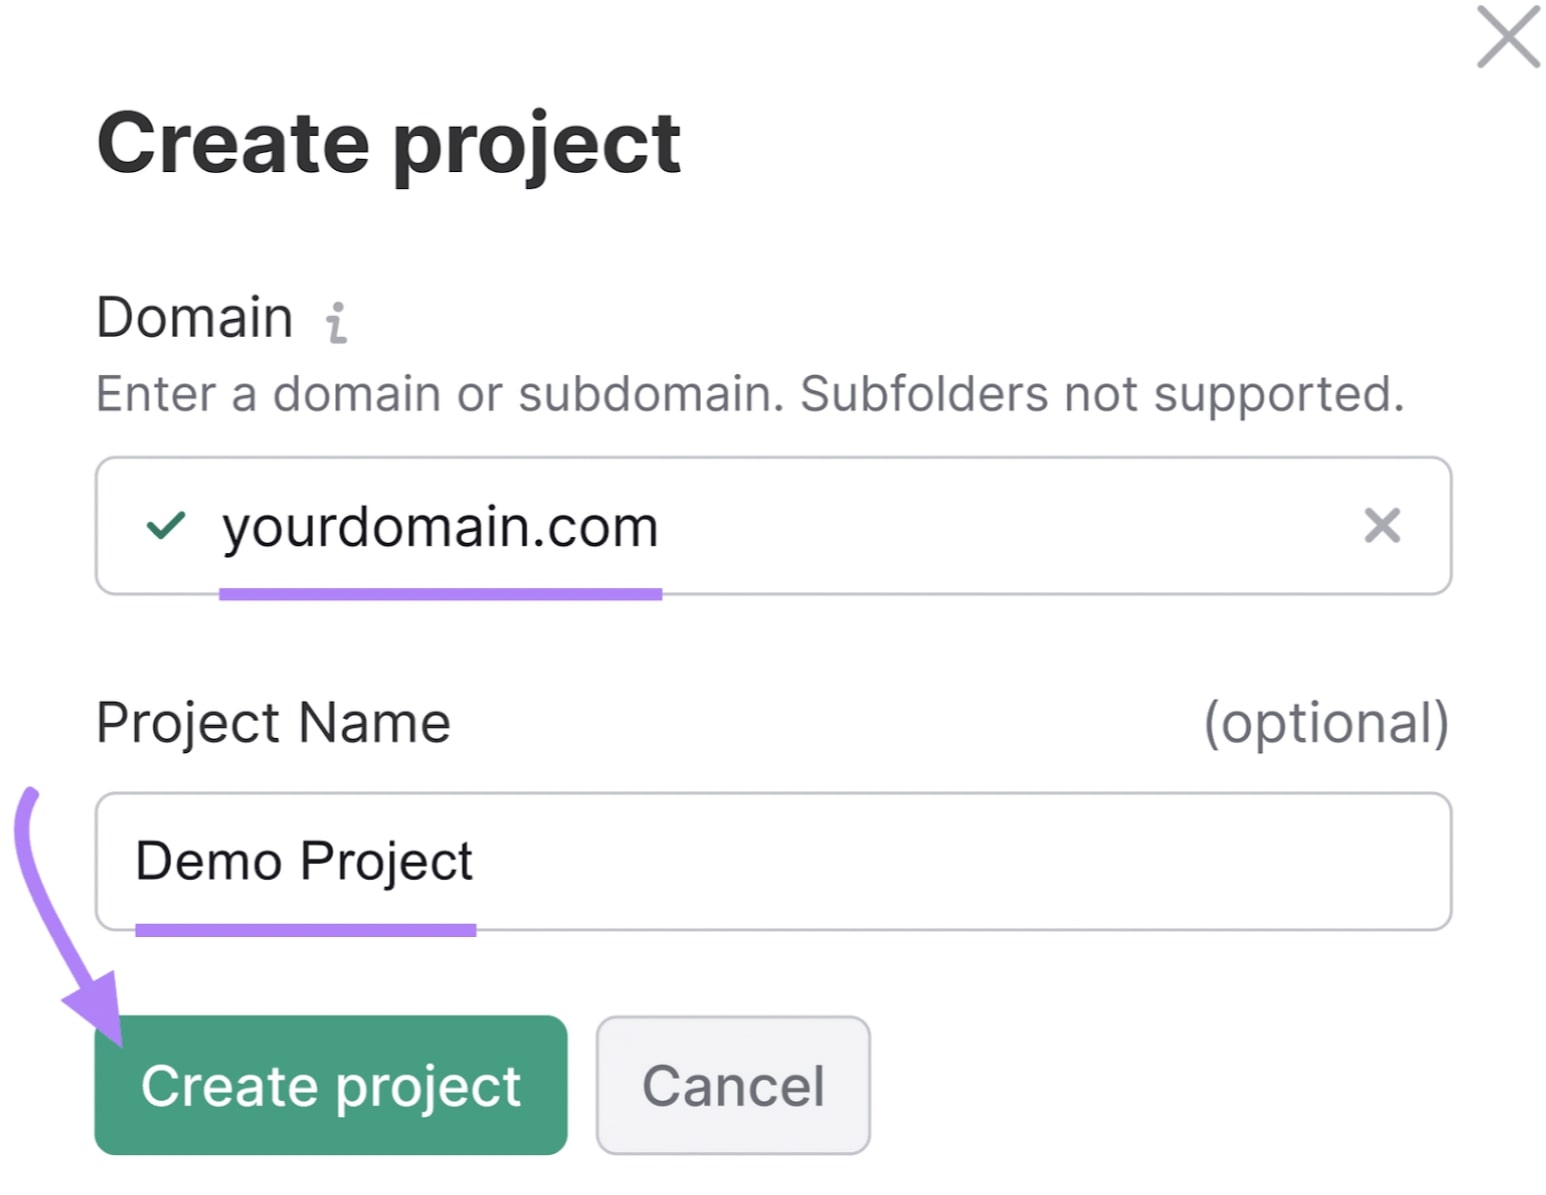 Creating a societal  toolkit task  for yourdomain.com and naming it 'Demo Project'